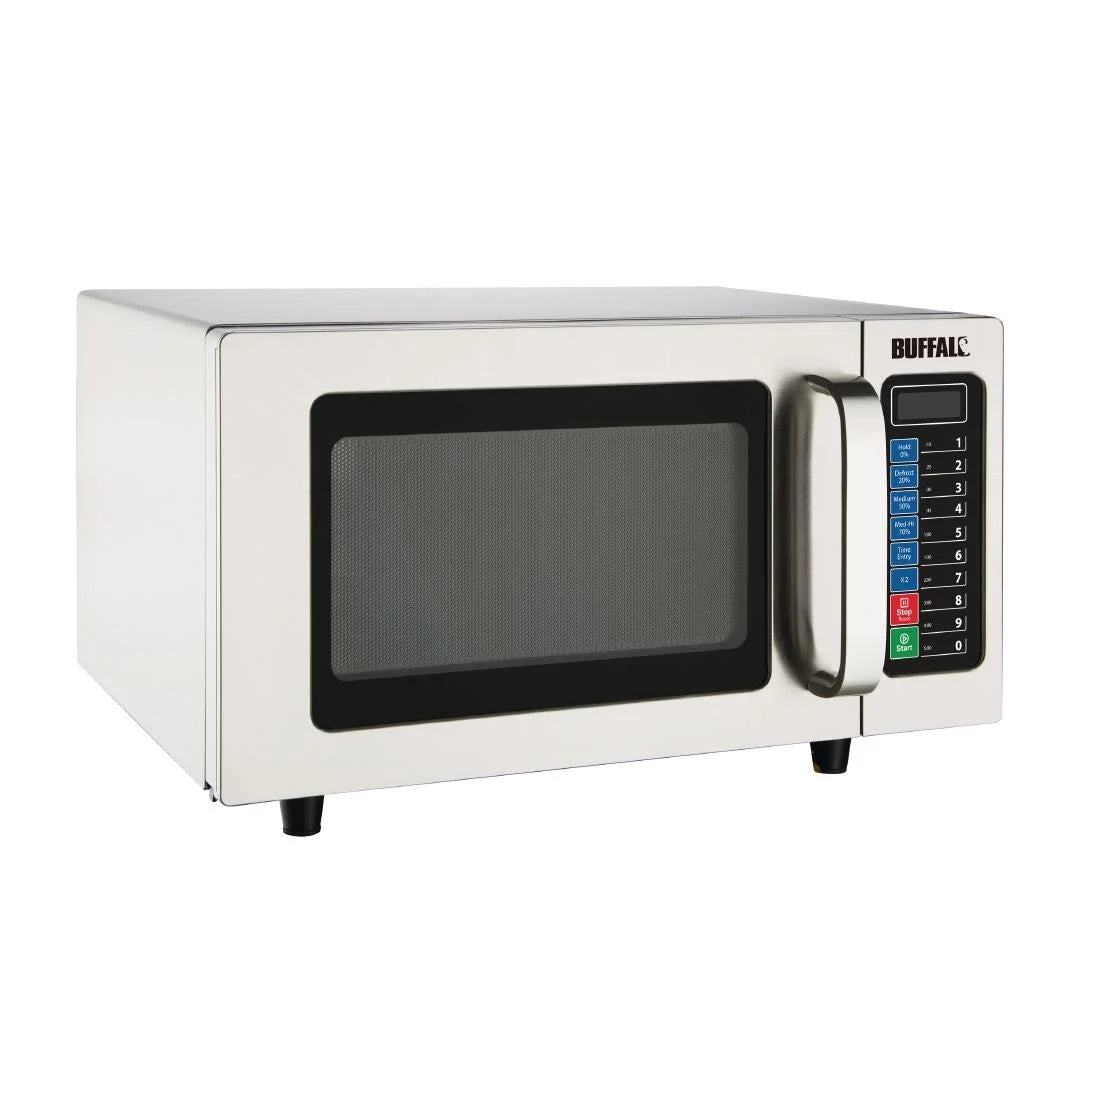 Programmable Commercial Microwave 25ltr 1000W.Product Ref:00589.Model: FB862. 🚚 1-3 Days Delivery